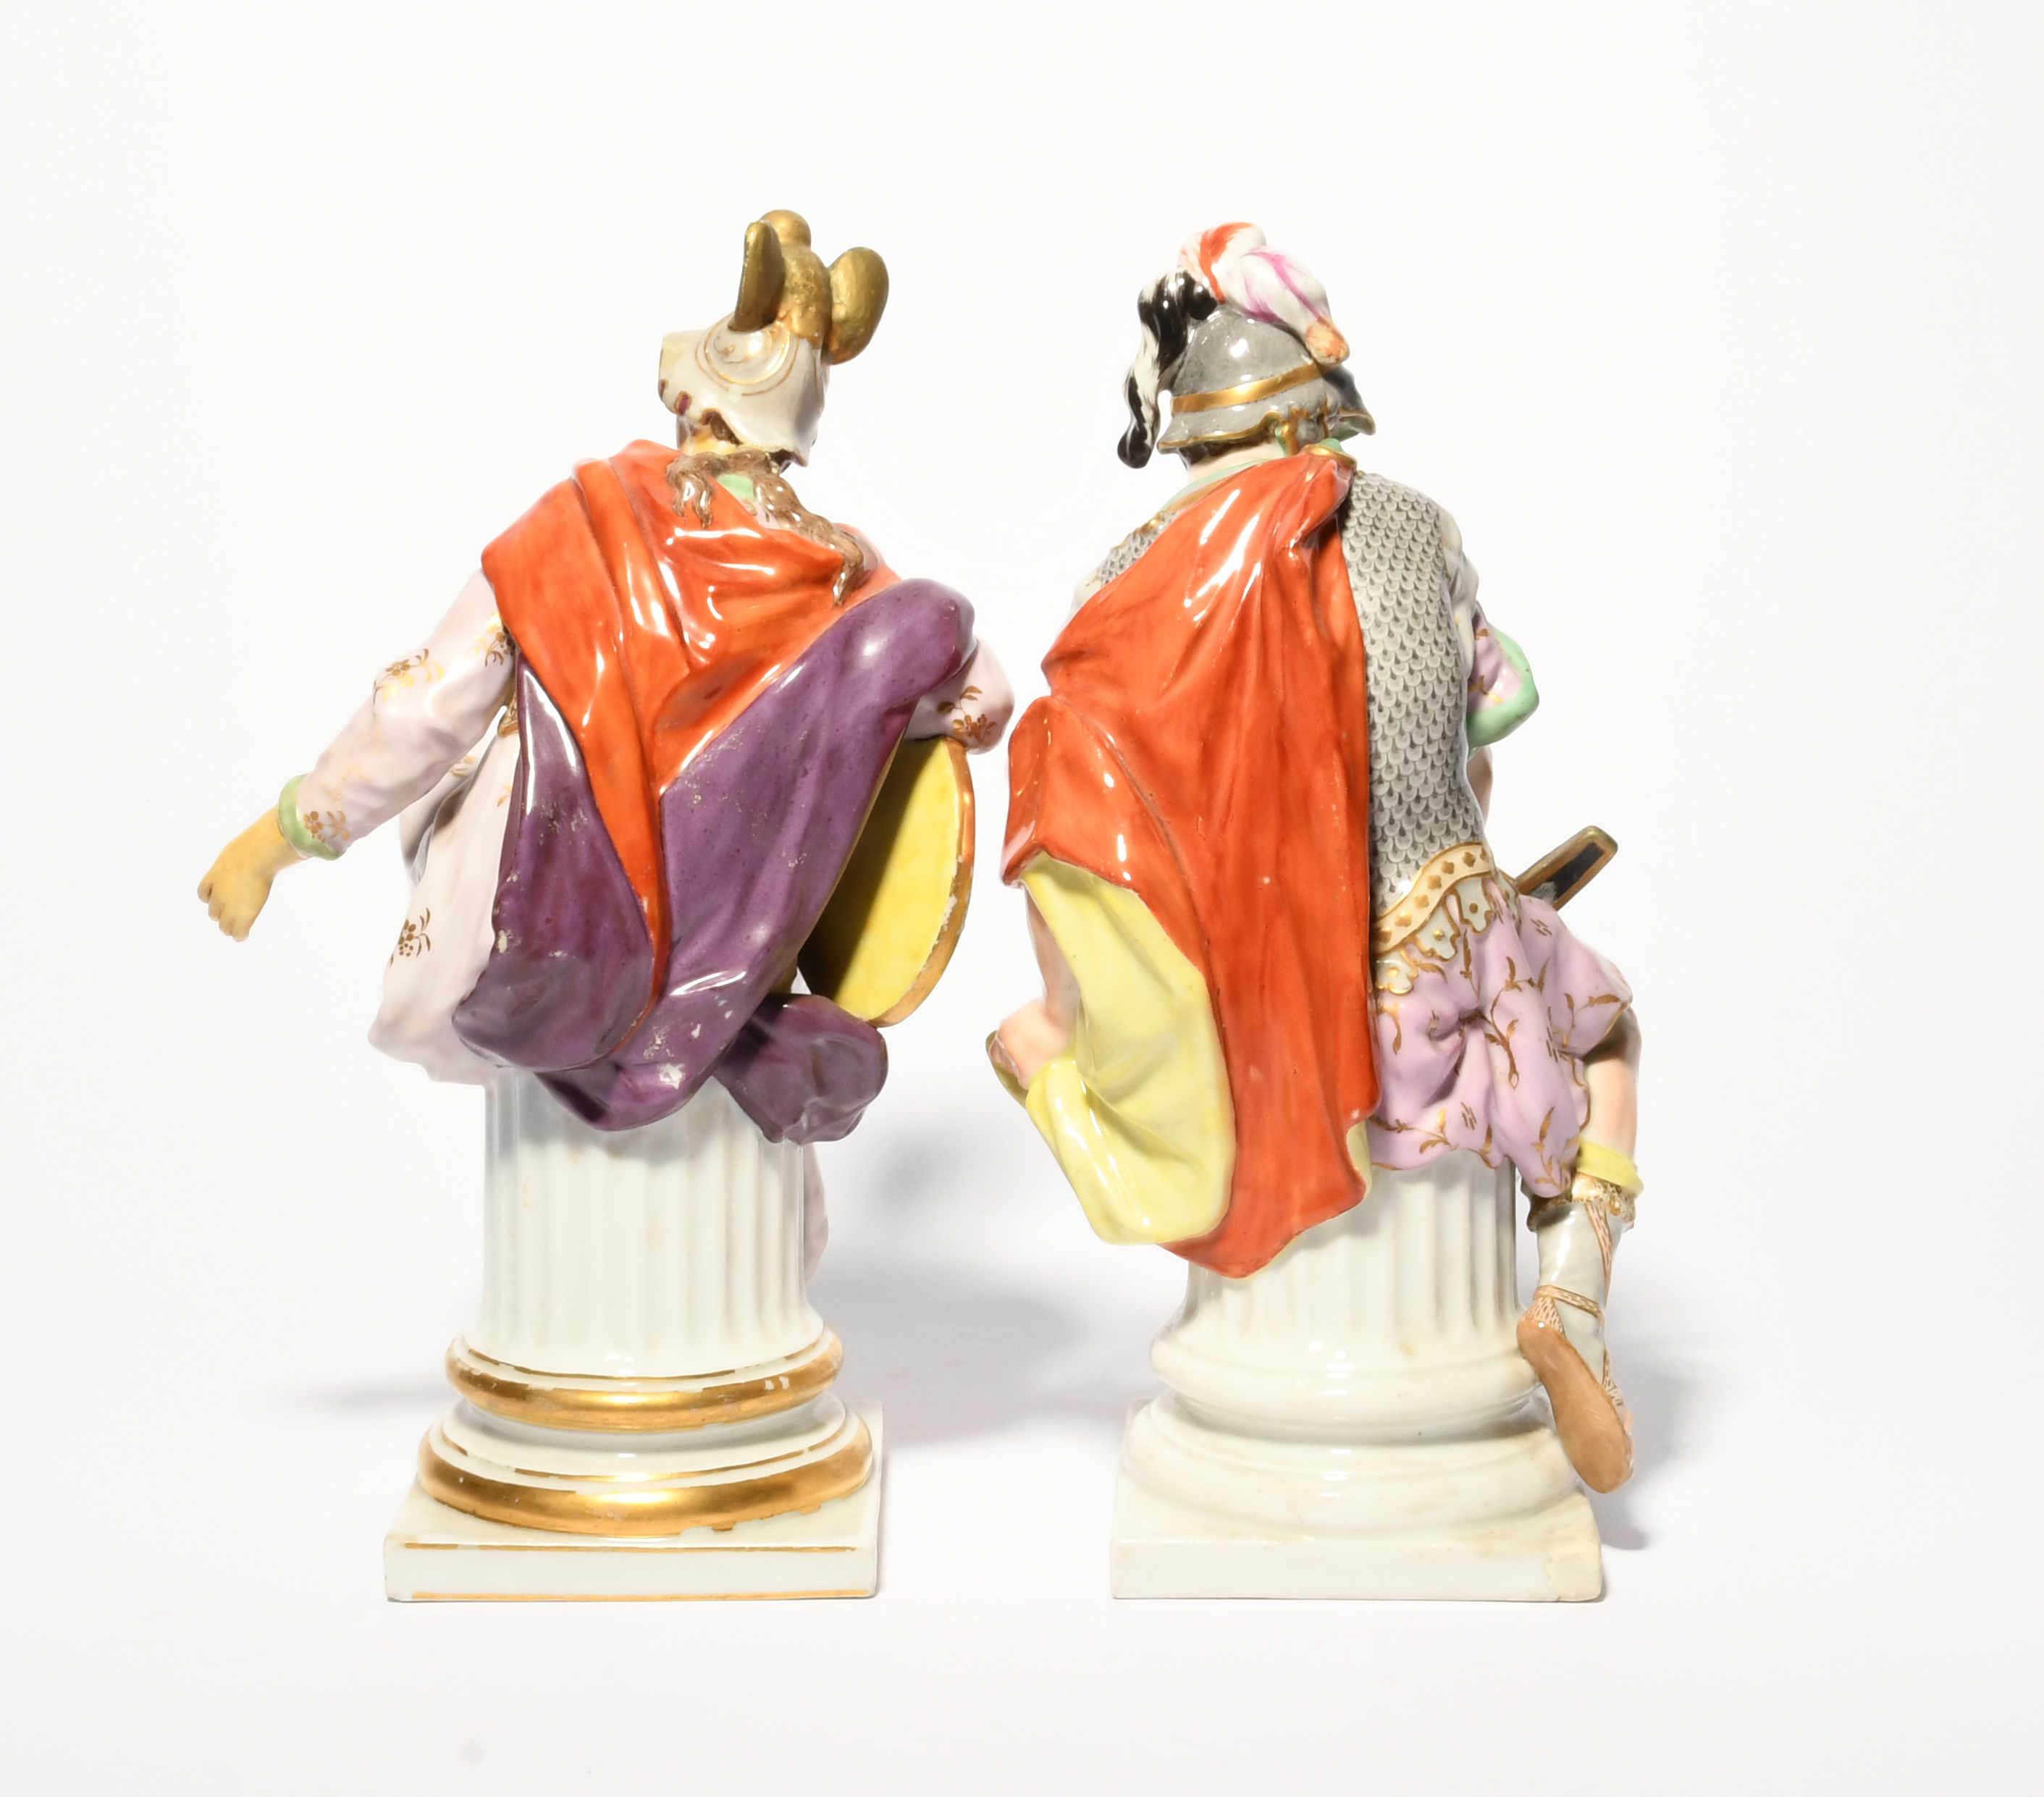 A pair of Berlin figures of Achilles and Minerva, 2nd half 18th century, each wearing a lilac robe - Image 2 of 2